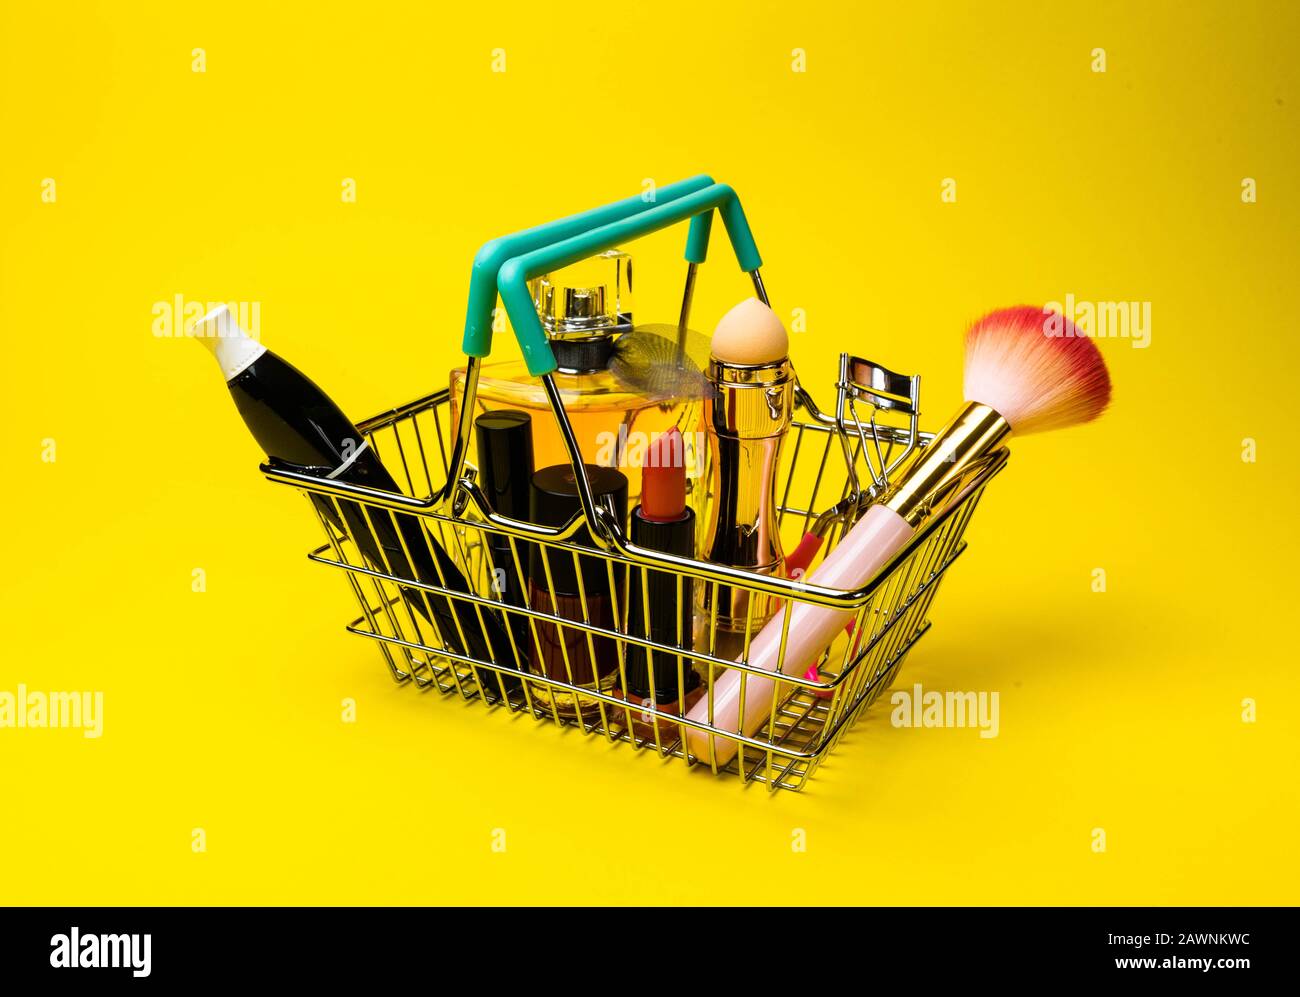 Makeup products fondant, mascara, perfume, brush, with cosmetic bag shopping cart on color background yellow Stock Photo